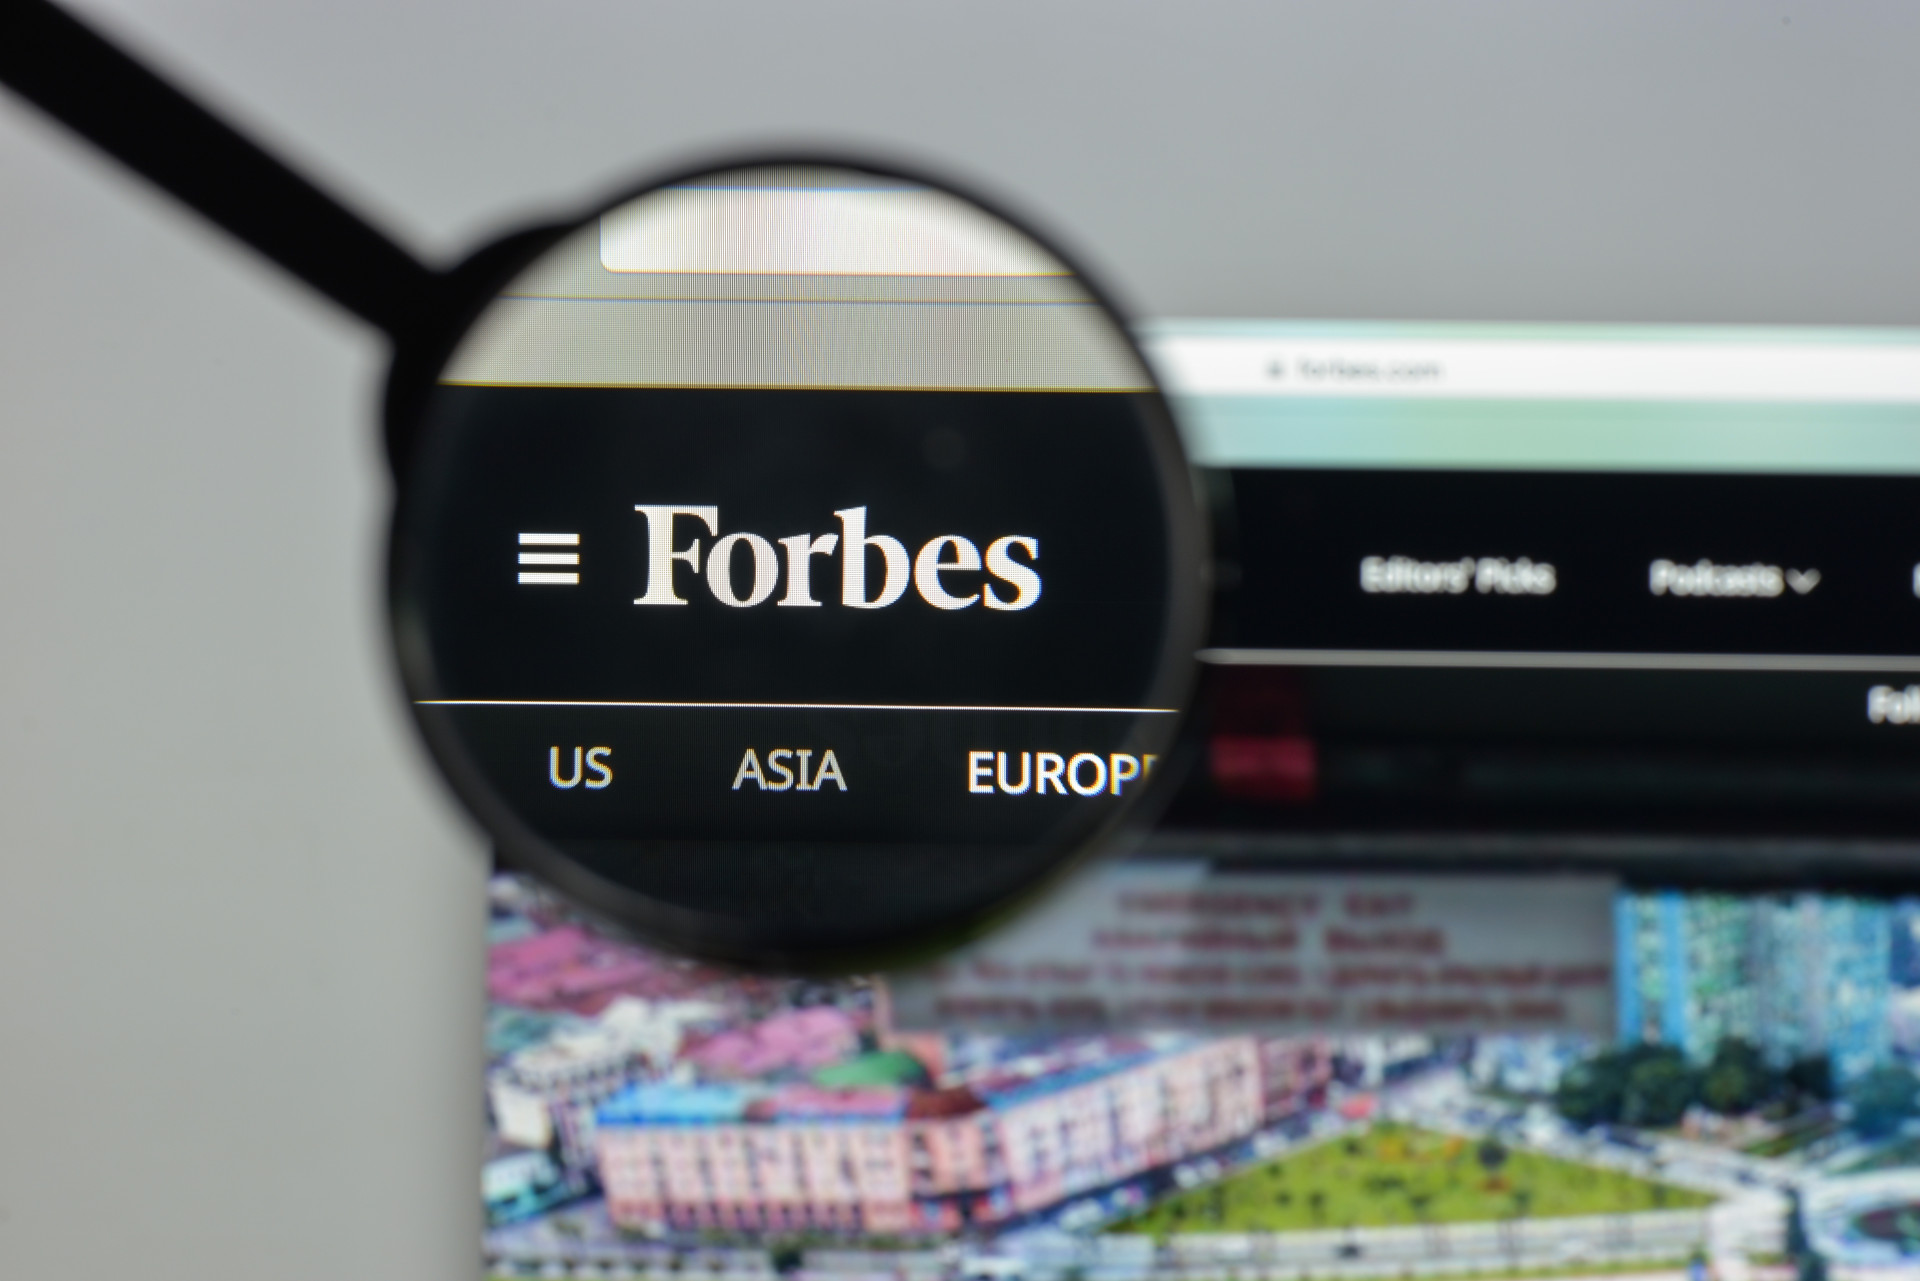 Another tip can be to check out the <a href="https://www.forbes.com/global2000/list/">Forbes</a> list of the biggest companies in the world. You'll understand the business field better and be able to do targeted research on hiring processes in the areas which you find the most interesting.<p>You may also like:<a href="https://www.starsinsider.com/n/456082?utm_source=msn.com&utm_medium=display&utm_campaign=referral_description&utm_content=198771v4en-us"> The most dangerous documentaries ever made</a></p>